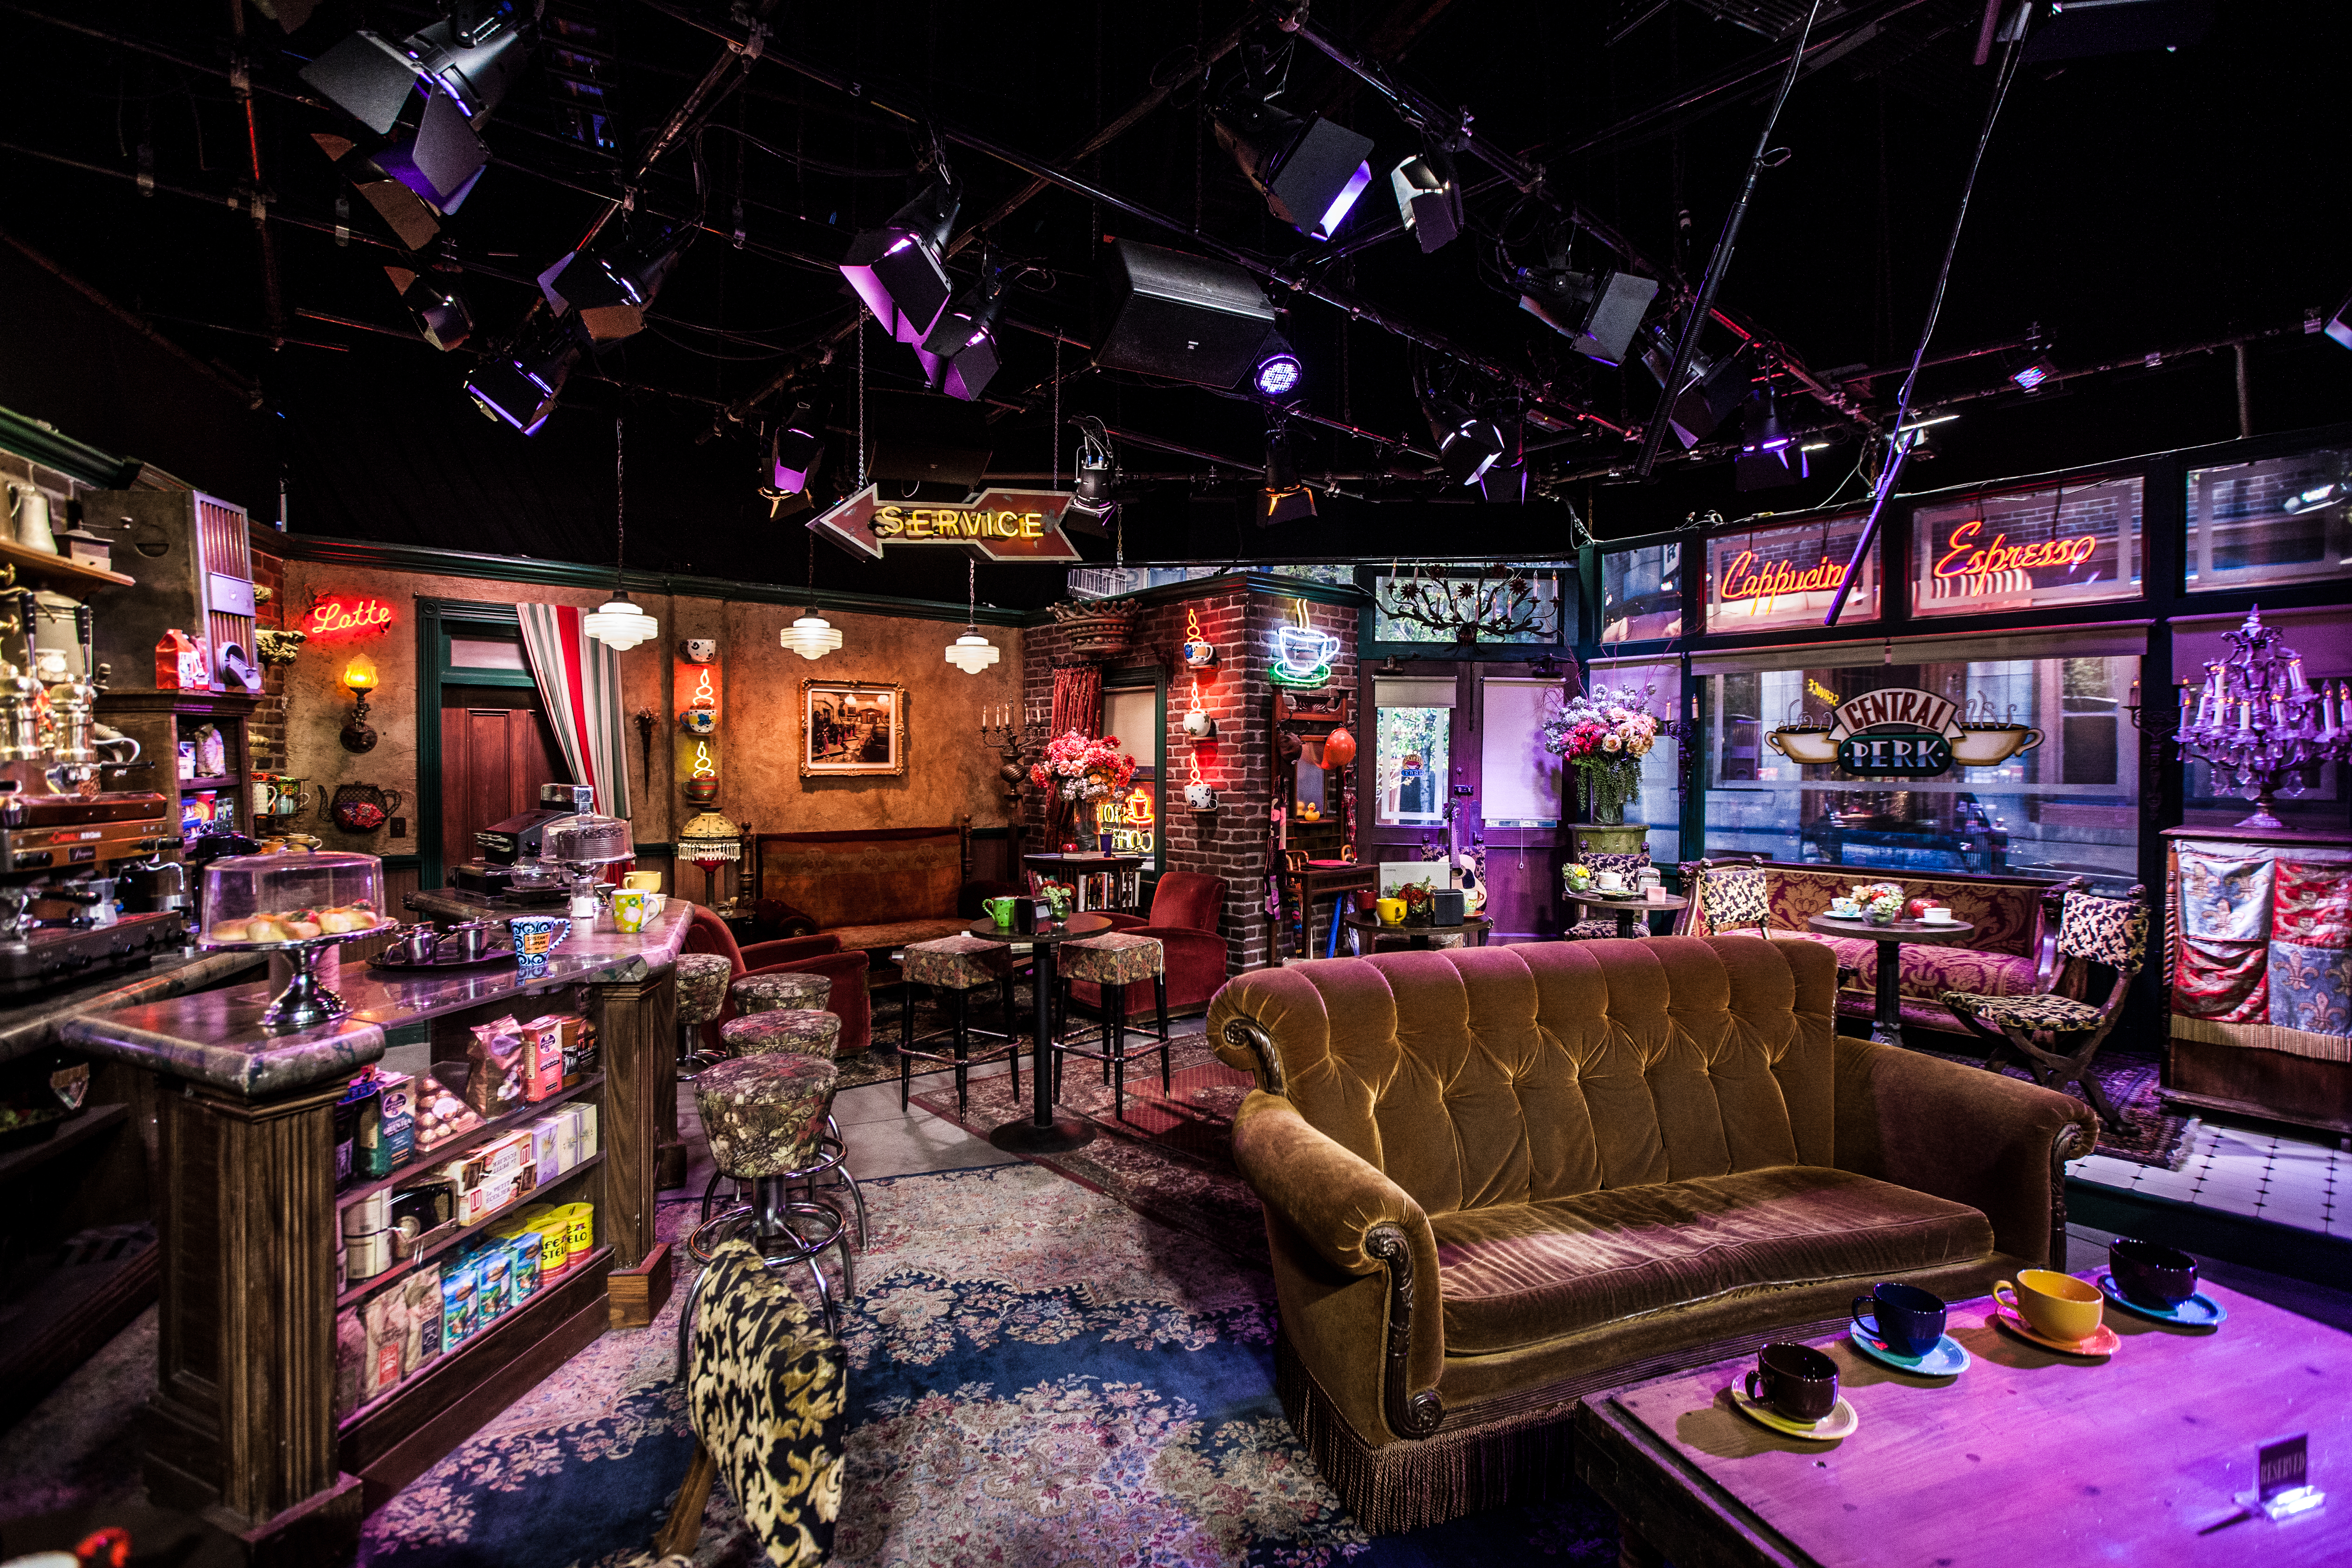 A set with the Central Perk from the TV show “Friends”